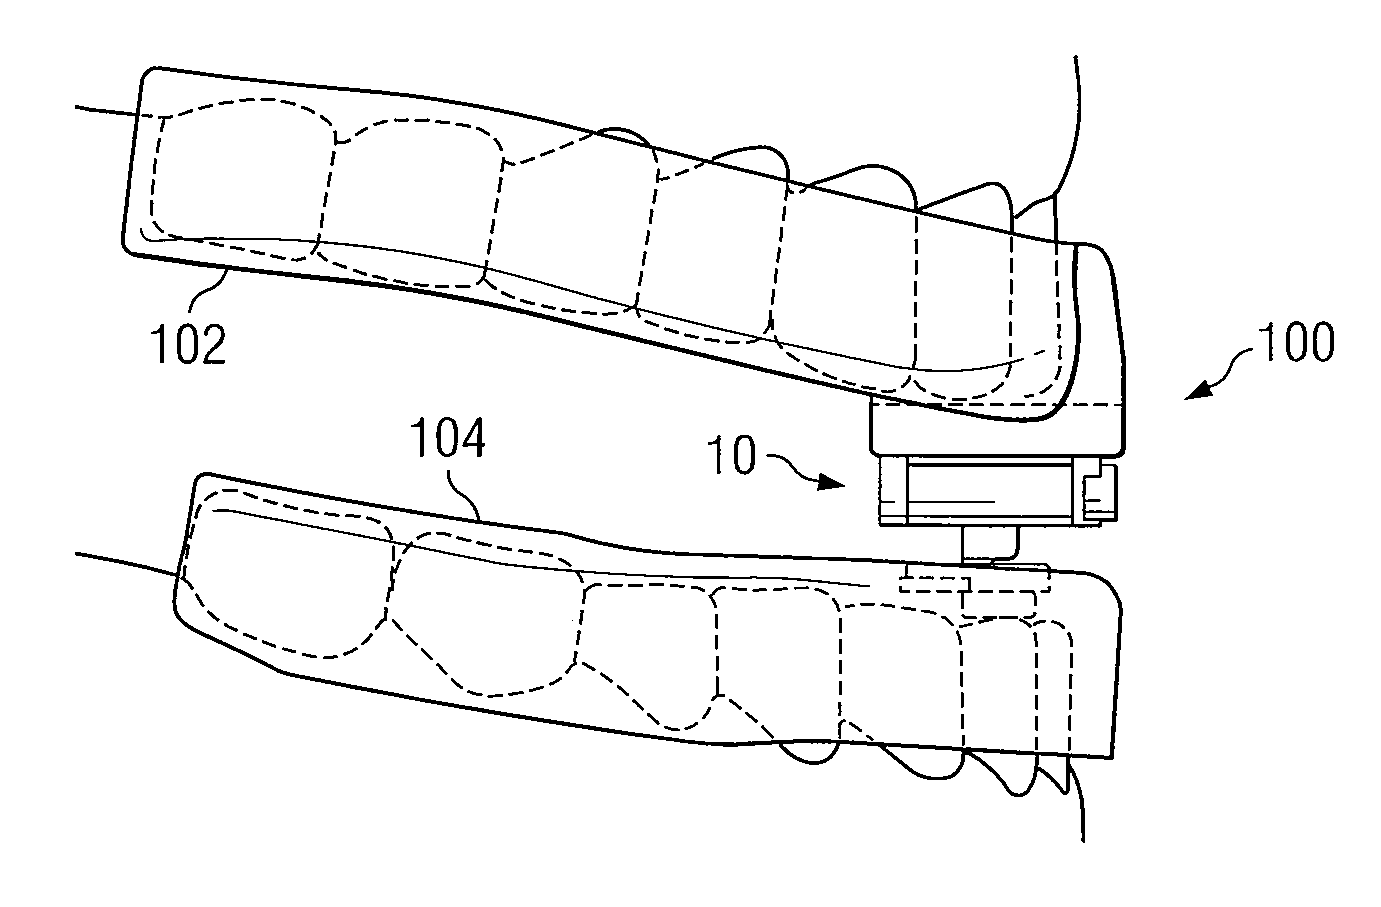 Oral Appliance for Treating a Breathing Condition